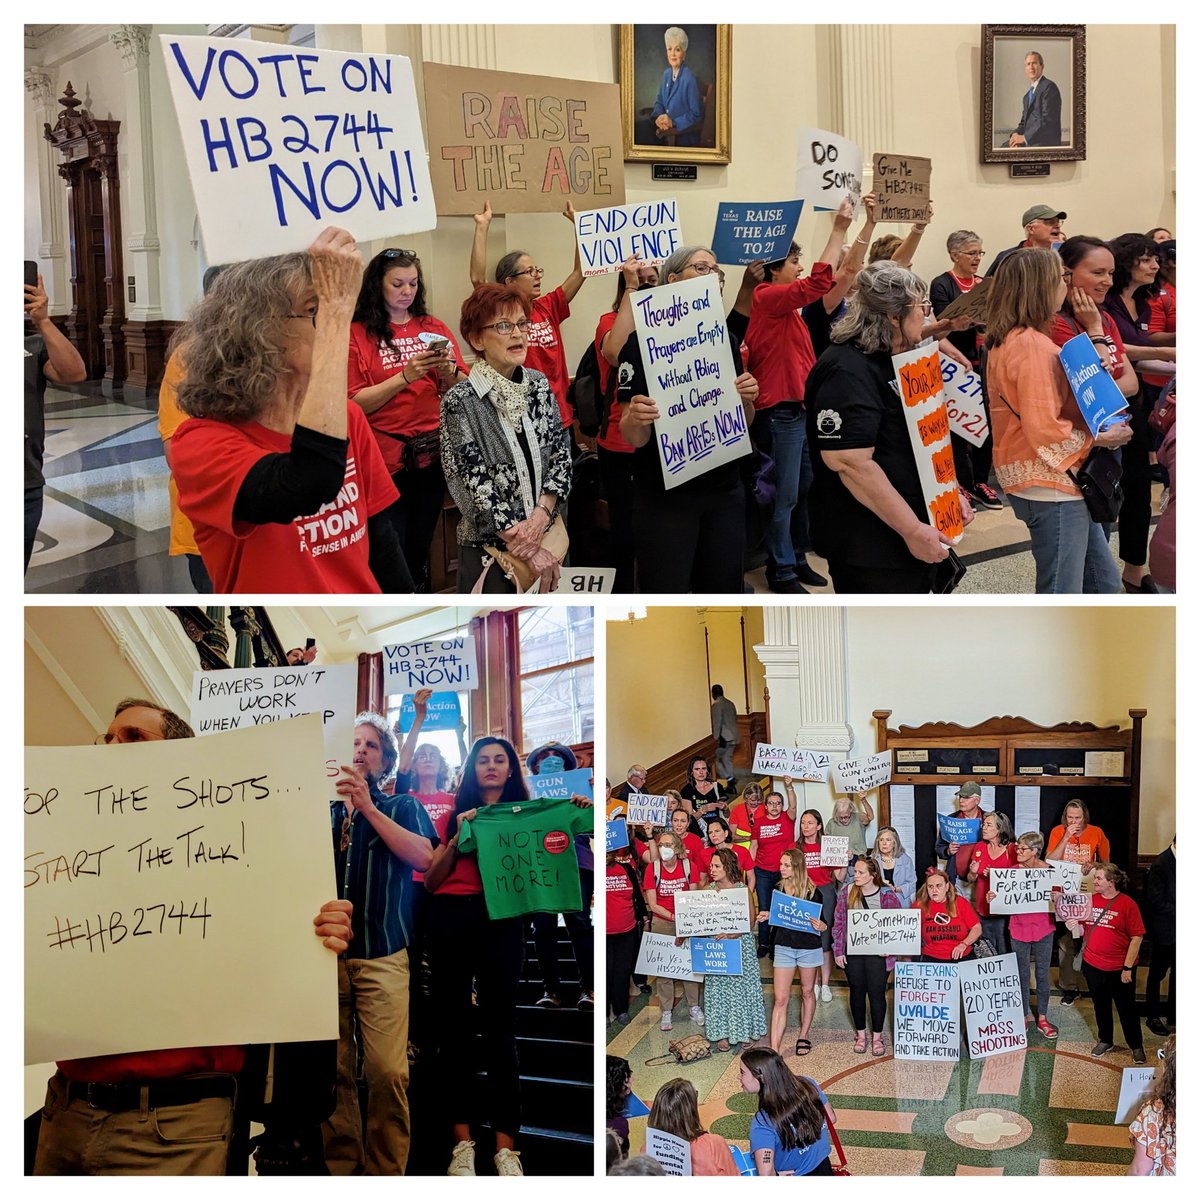 In the wake of yet another mass shooting in Texas, our volunteers have gathered at the Texas statehouse to demand action to end this scourge on our families and communities.

We want a vote on HB 2744 to #RaiseTheAge to purchase and possess firearms from 18 to 21! #TXLege